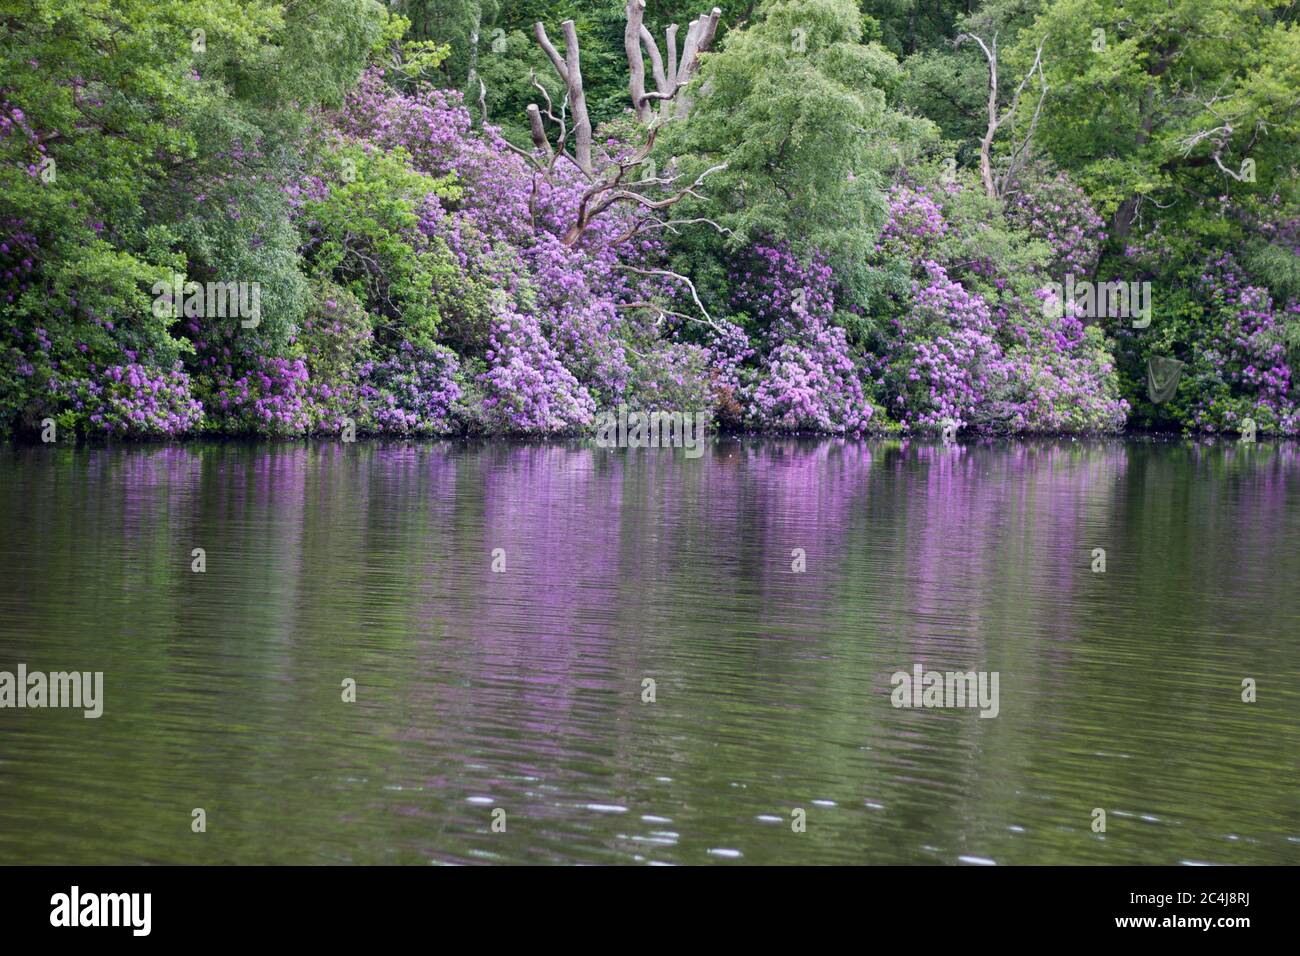 Lakeside scene in spring showing pink rhododendrons reflected in water Stock Photo